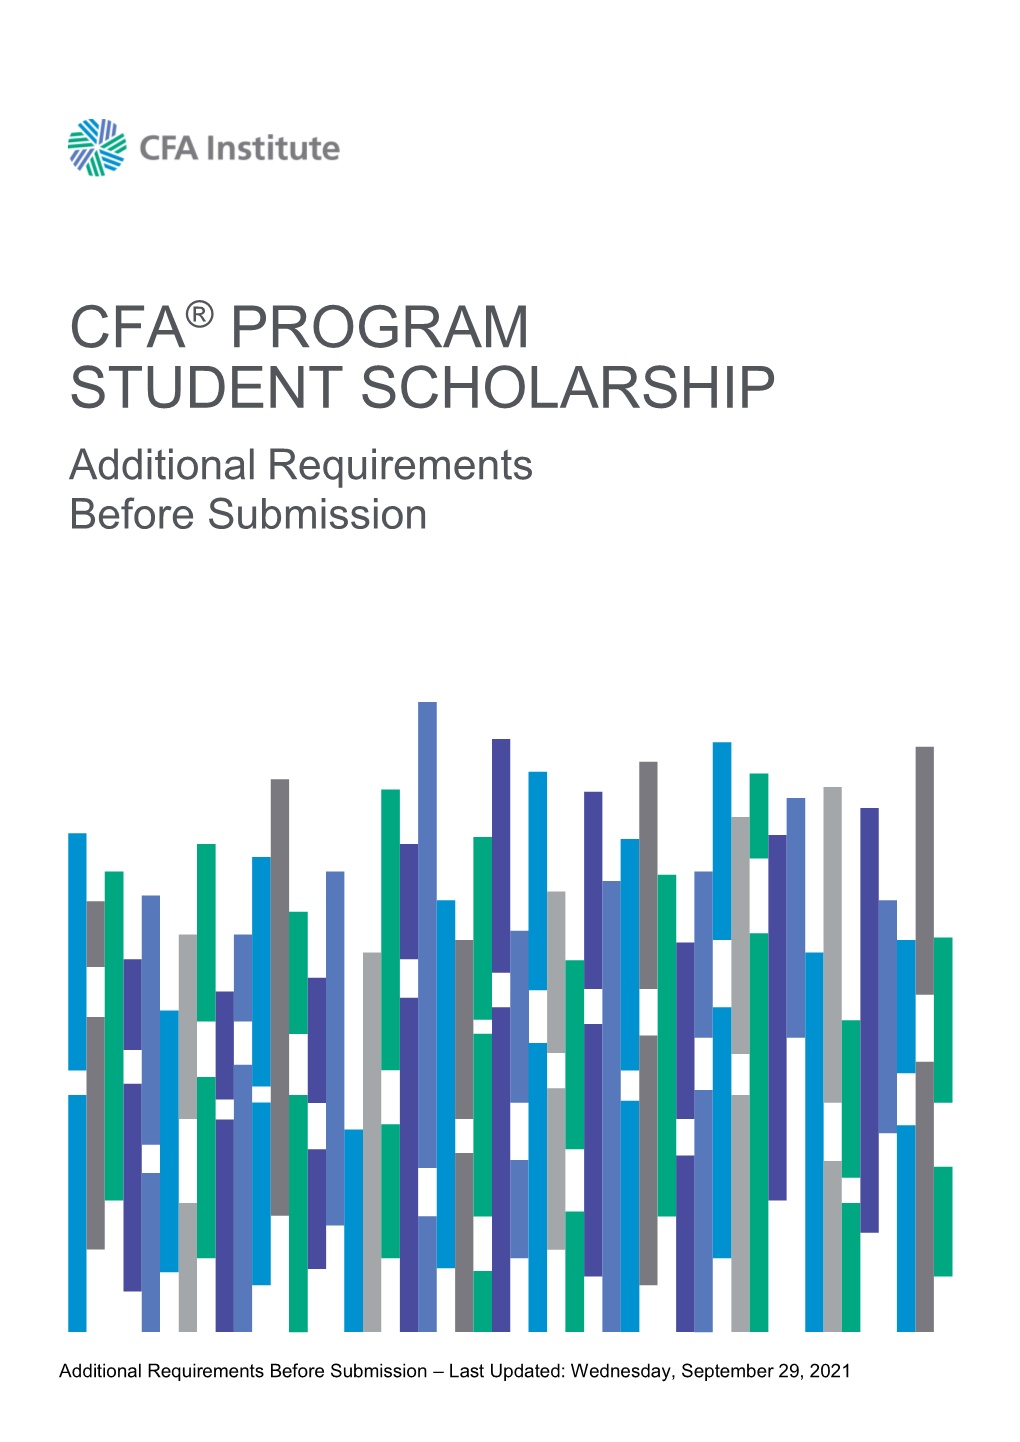 PROGRAM STUDENT SCHOLARSHIP Additional Requirements Before Submission